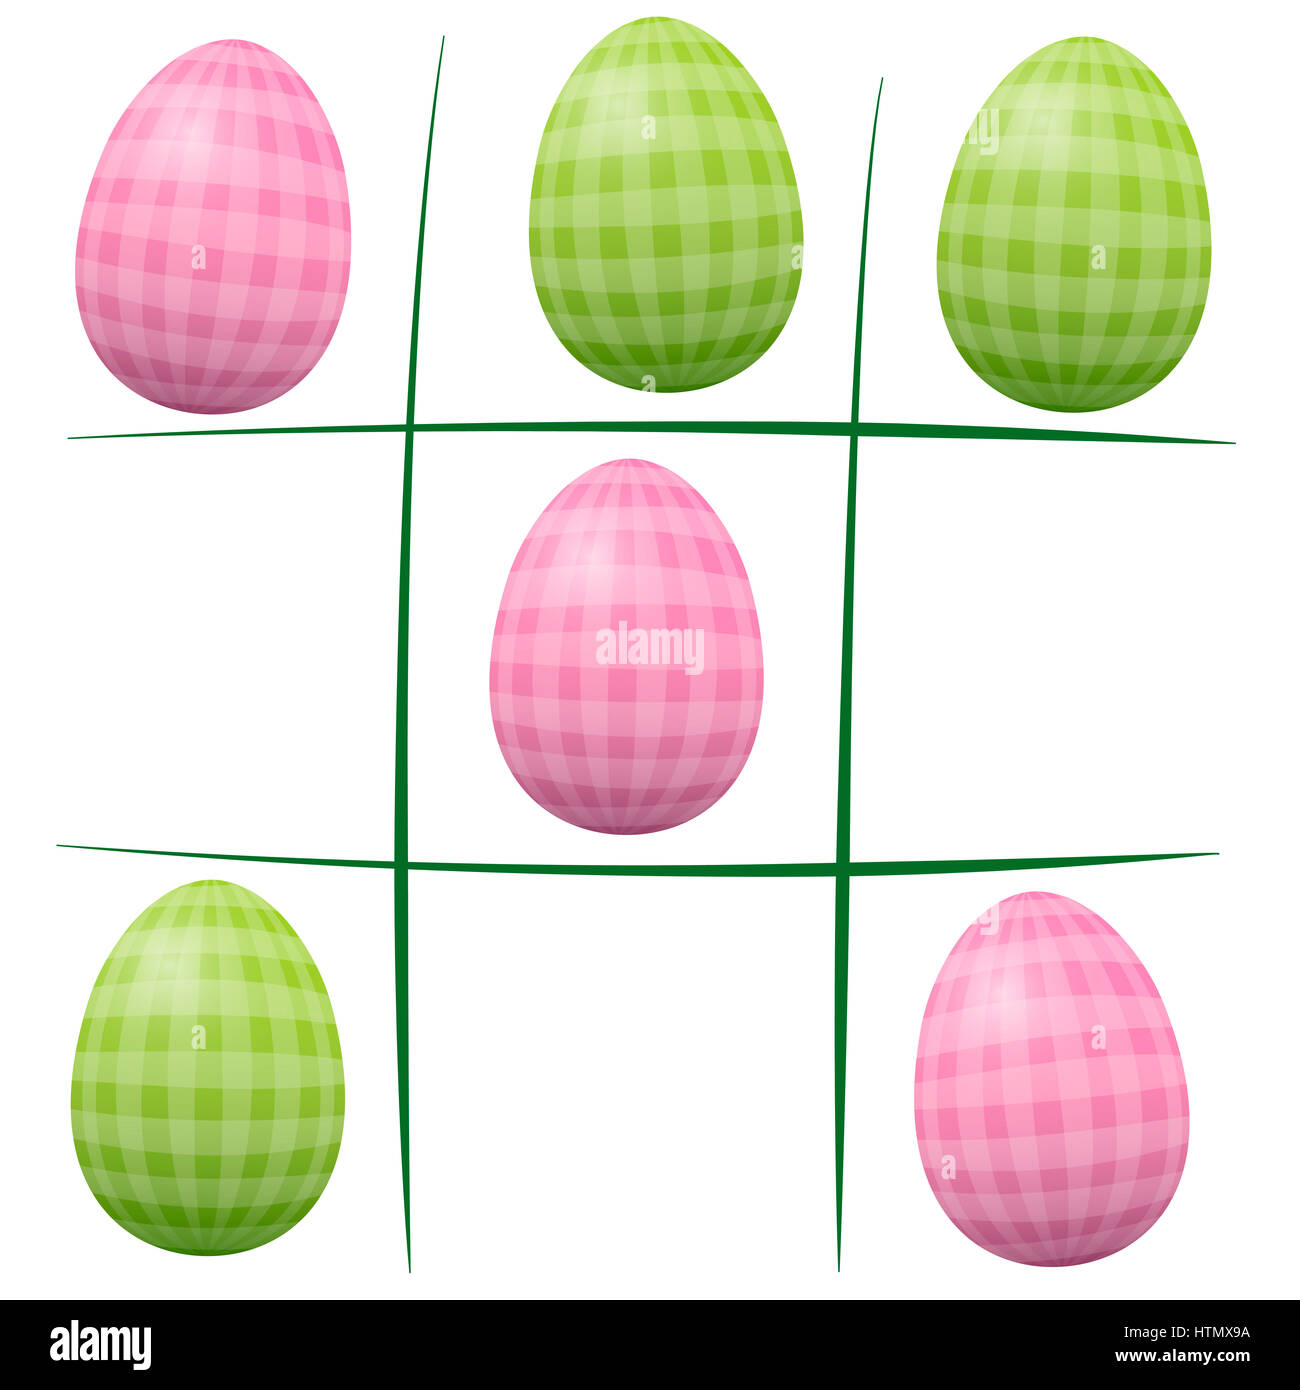 Easter eggs playing tic tac toe - vintage style, with checked gingham pattern. Isolated illustration on white background. Stock Photo